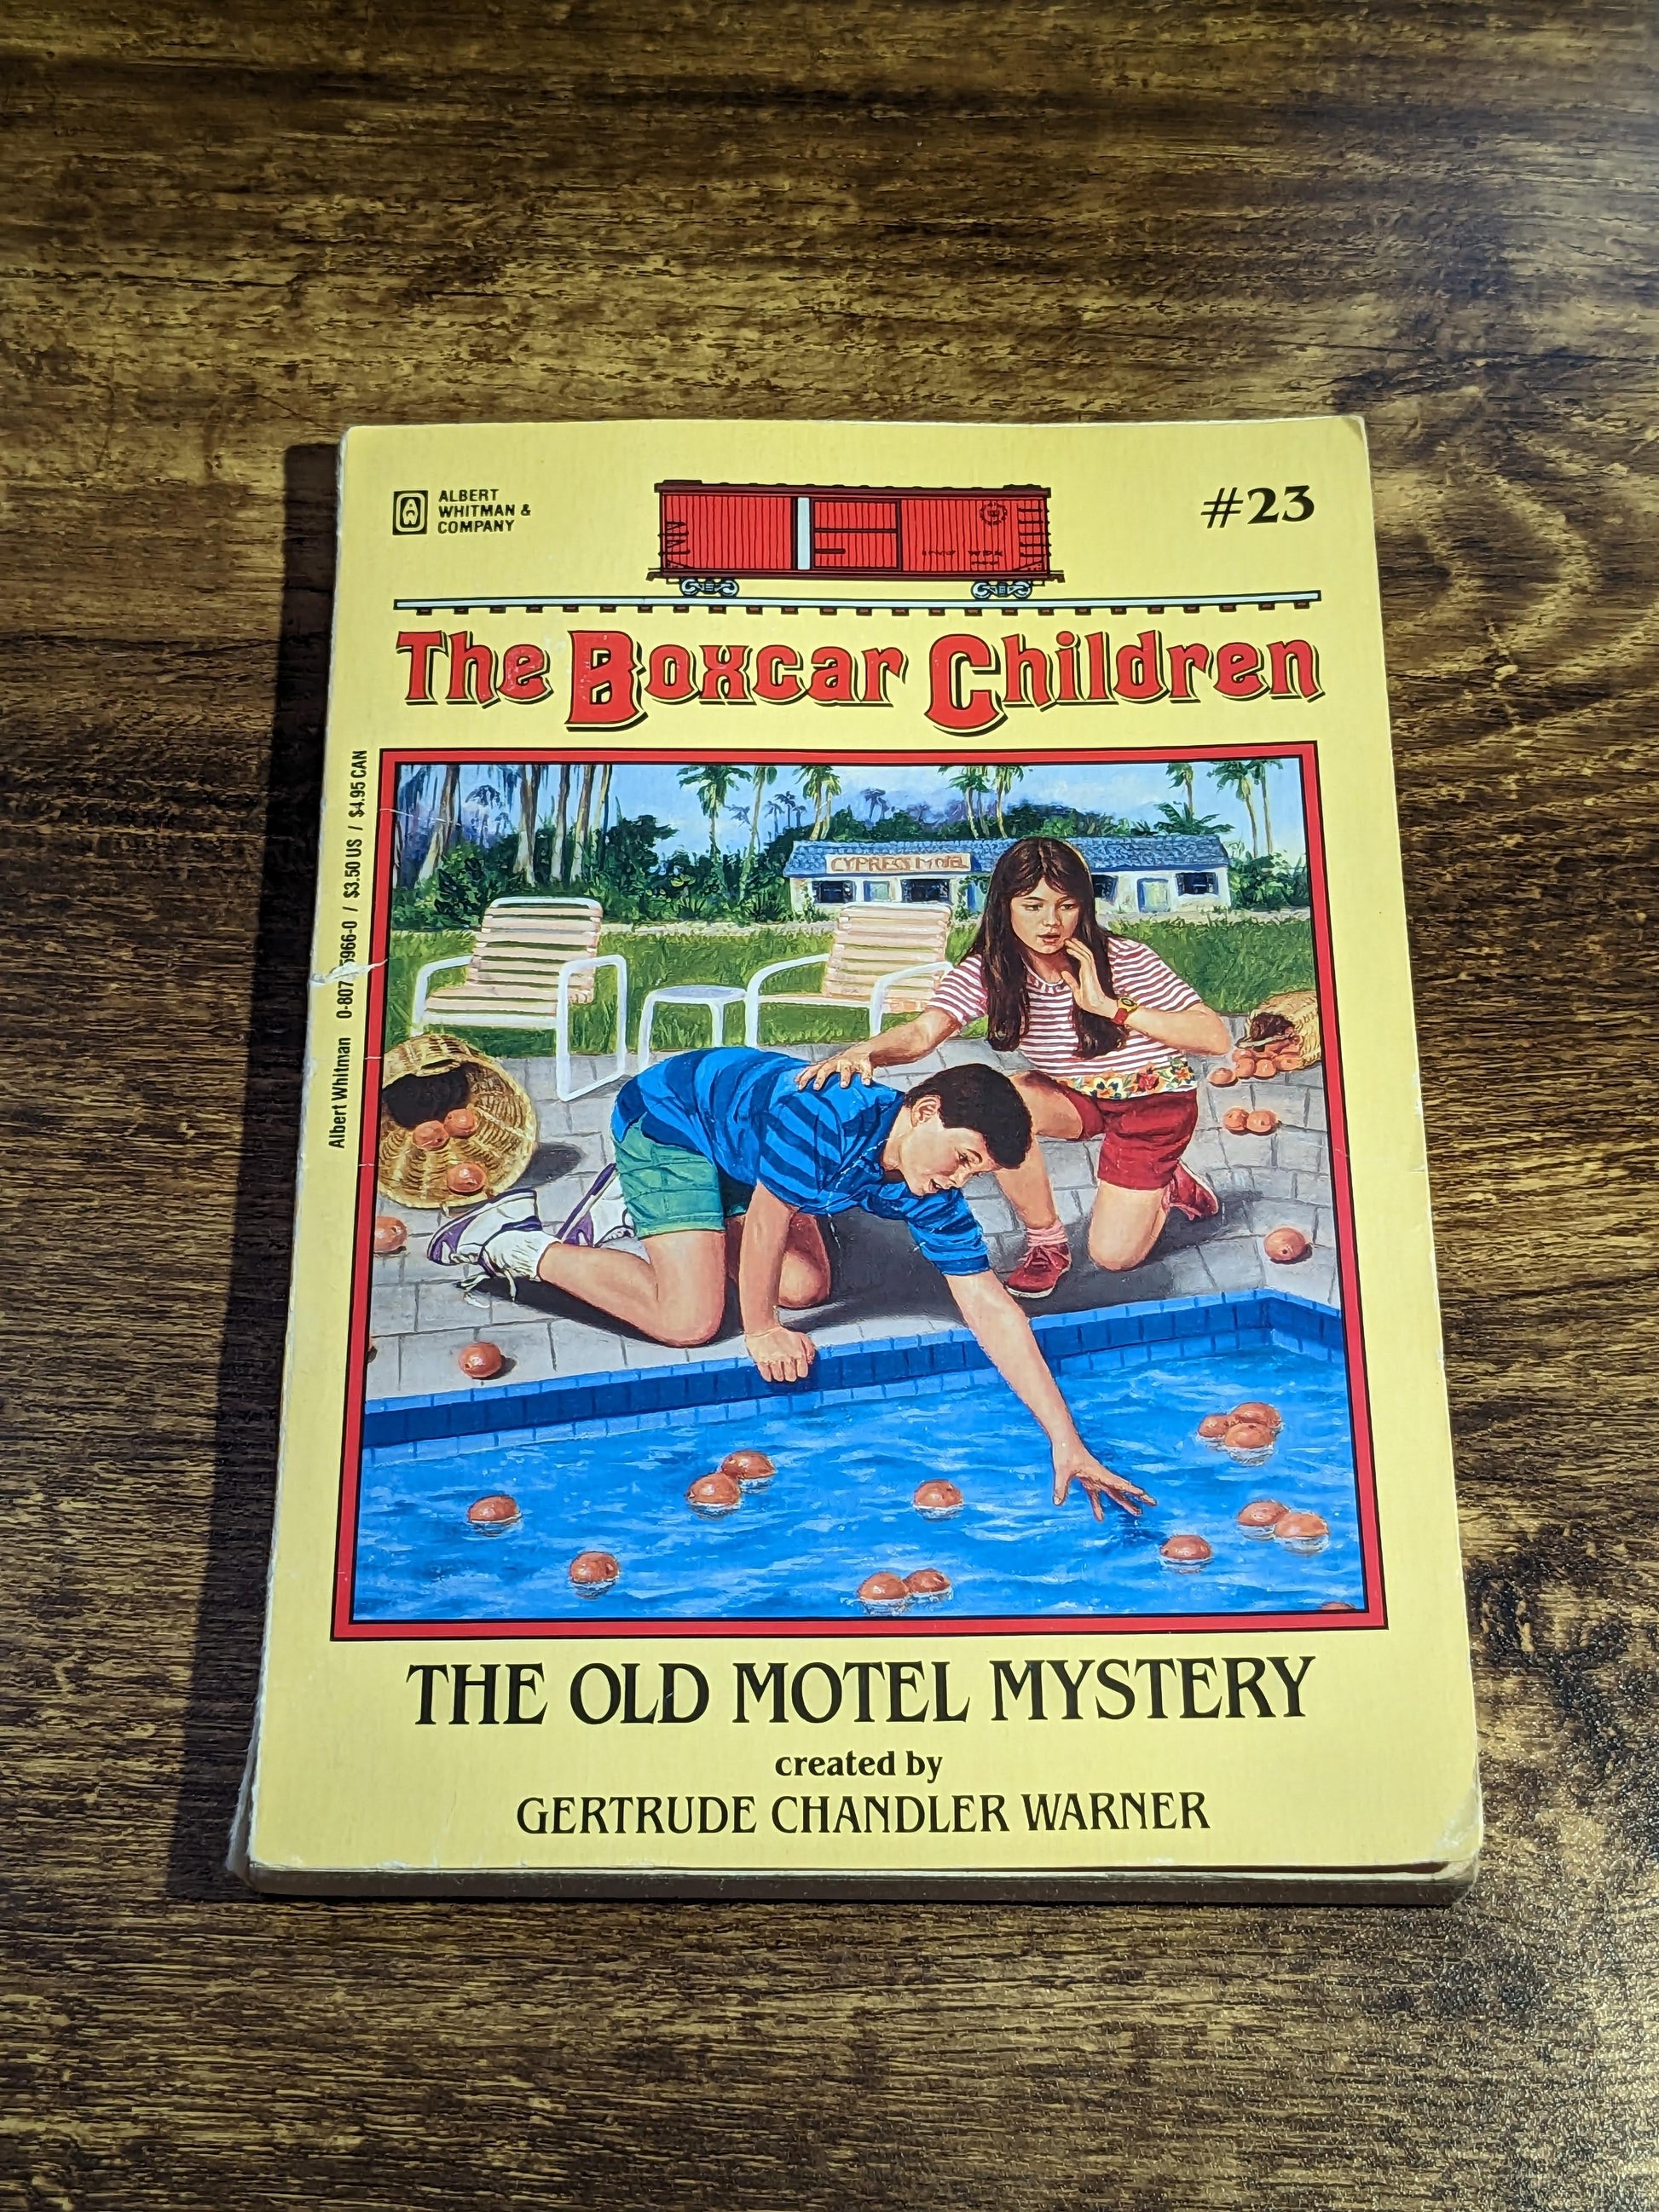 Old Motel Mystery (The Boxcar Children Mysteries) by Gertrude Chandler Warner - Asylum Books